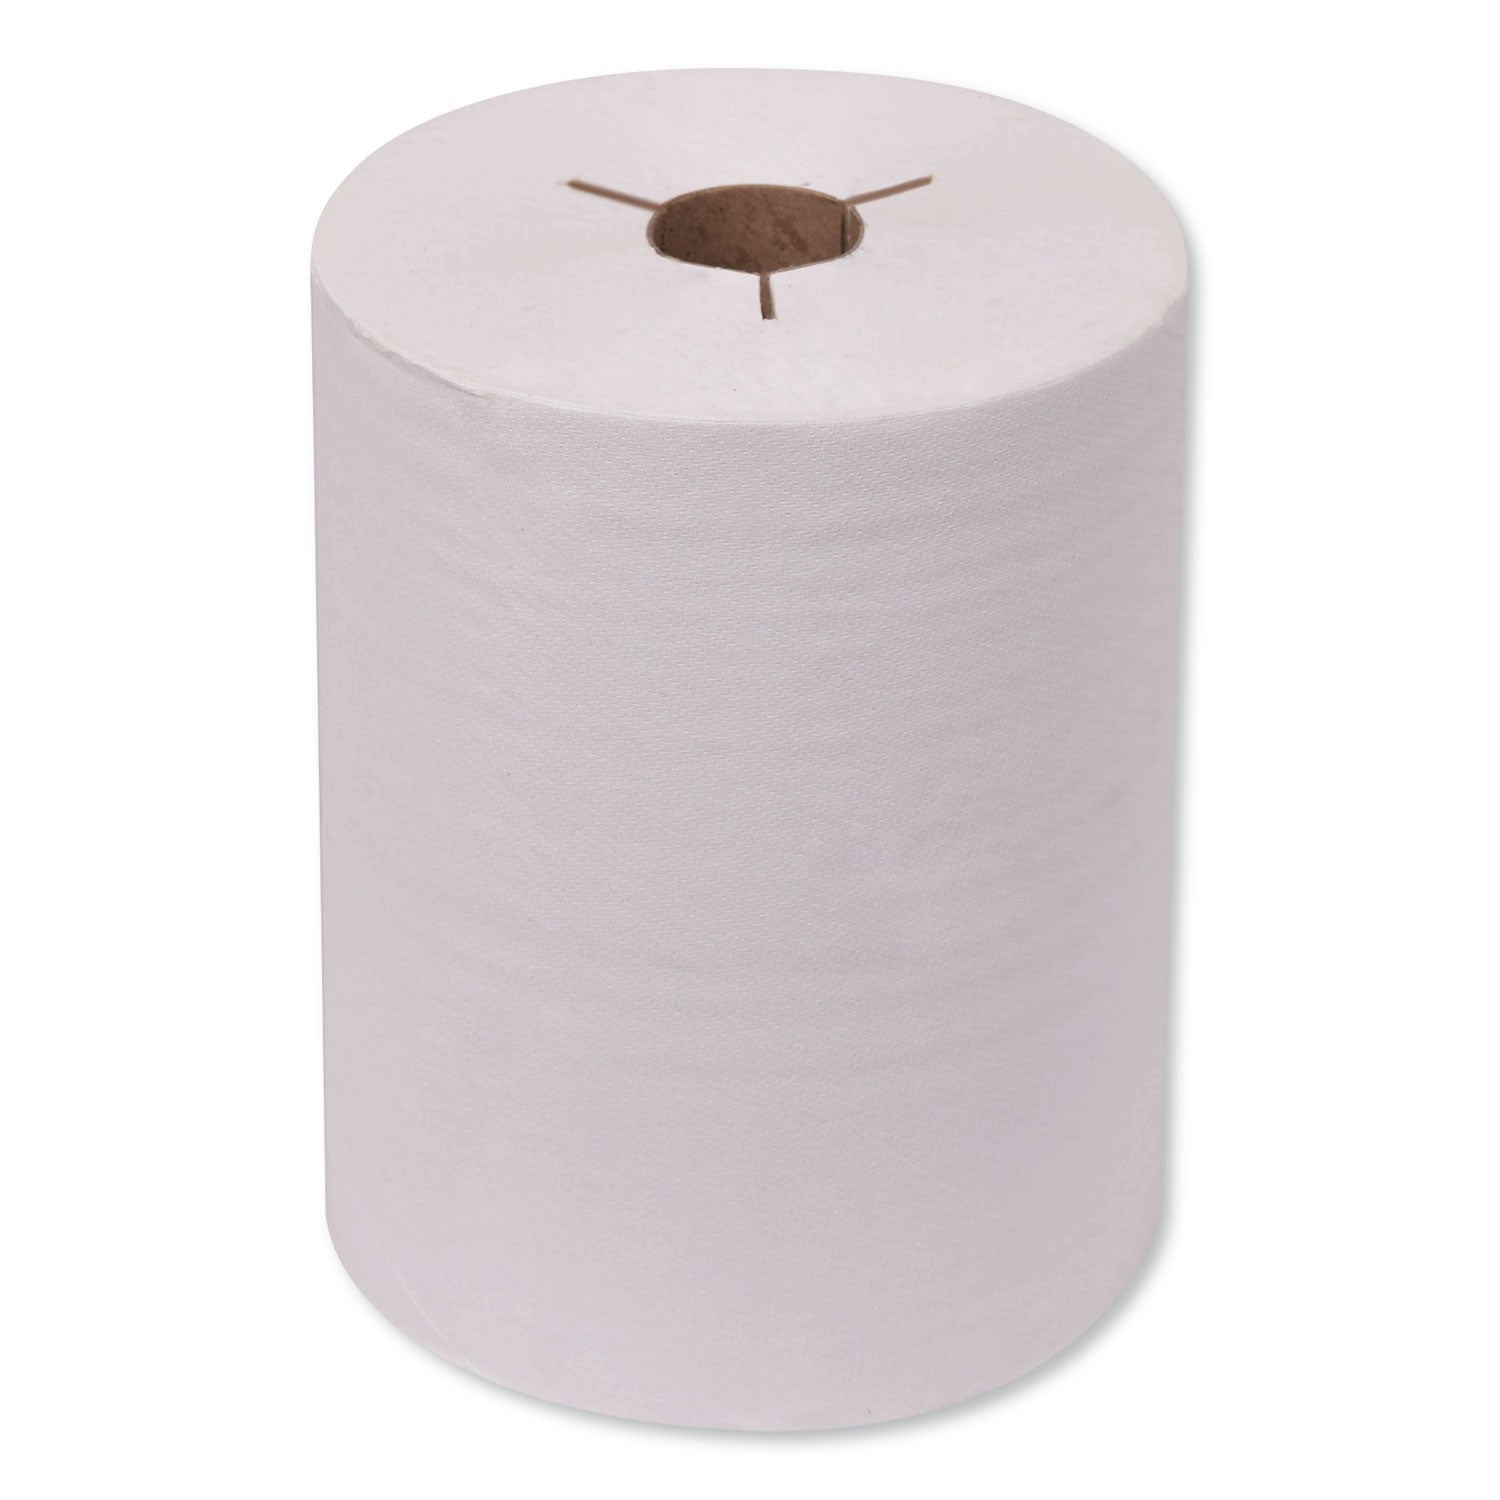 universal-hand-towel-roll-notched-1-ply-8-x-425-ft-natural-white-12-rolls-carton_trk8621400 - 1